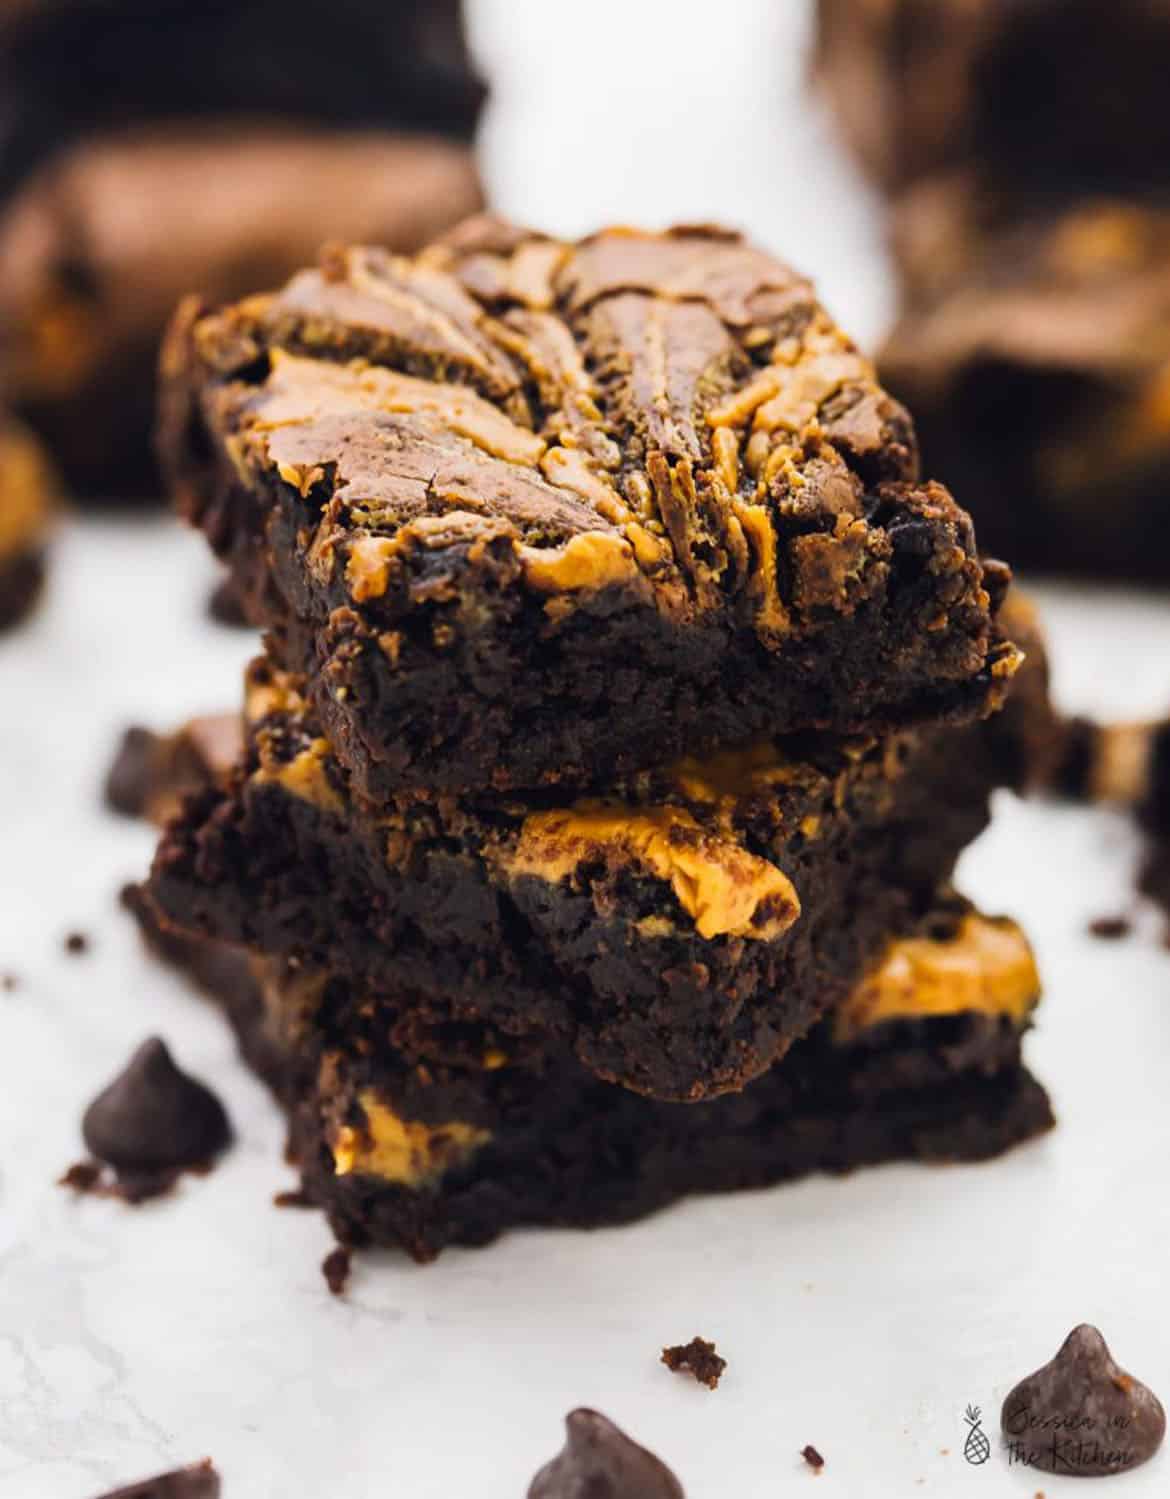  VEGAN CHOCOLATE PEANUT BUTTER SWIRL BROWNIES over a white background - Jessica in the kitchen